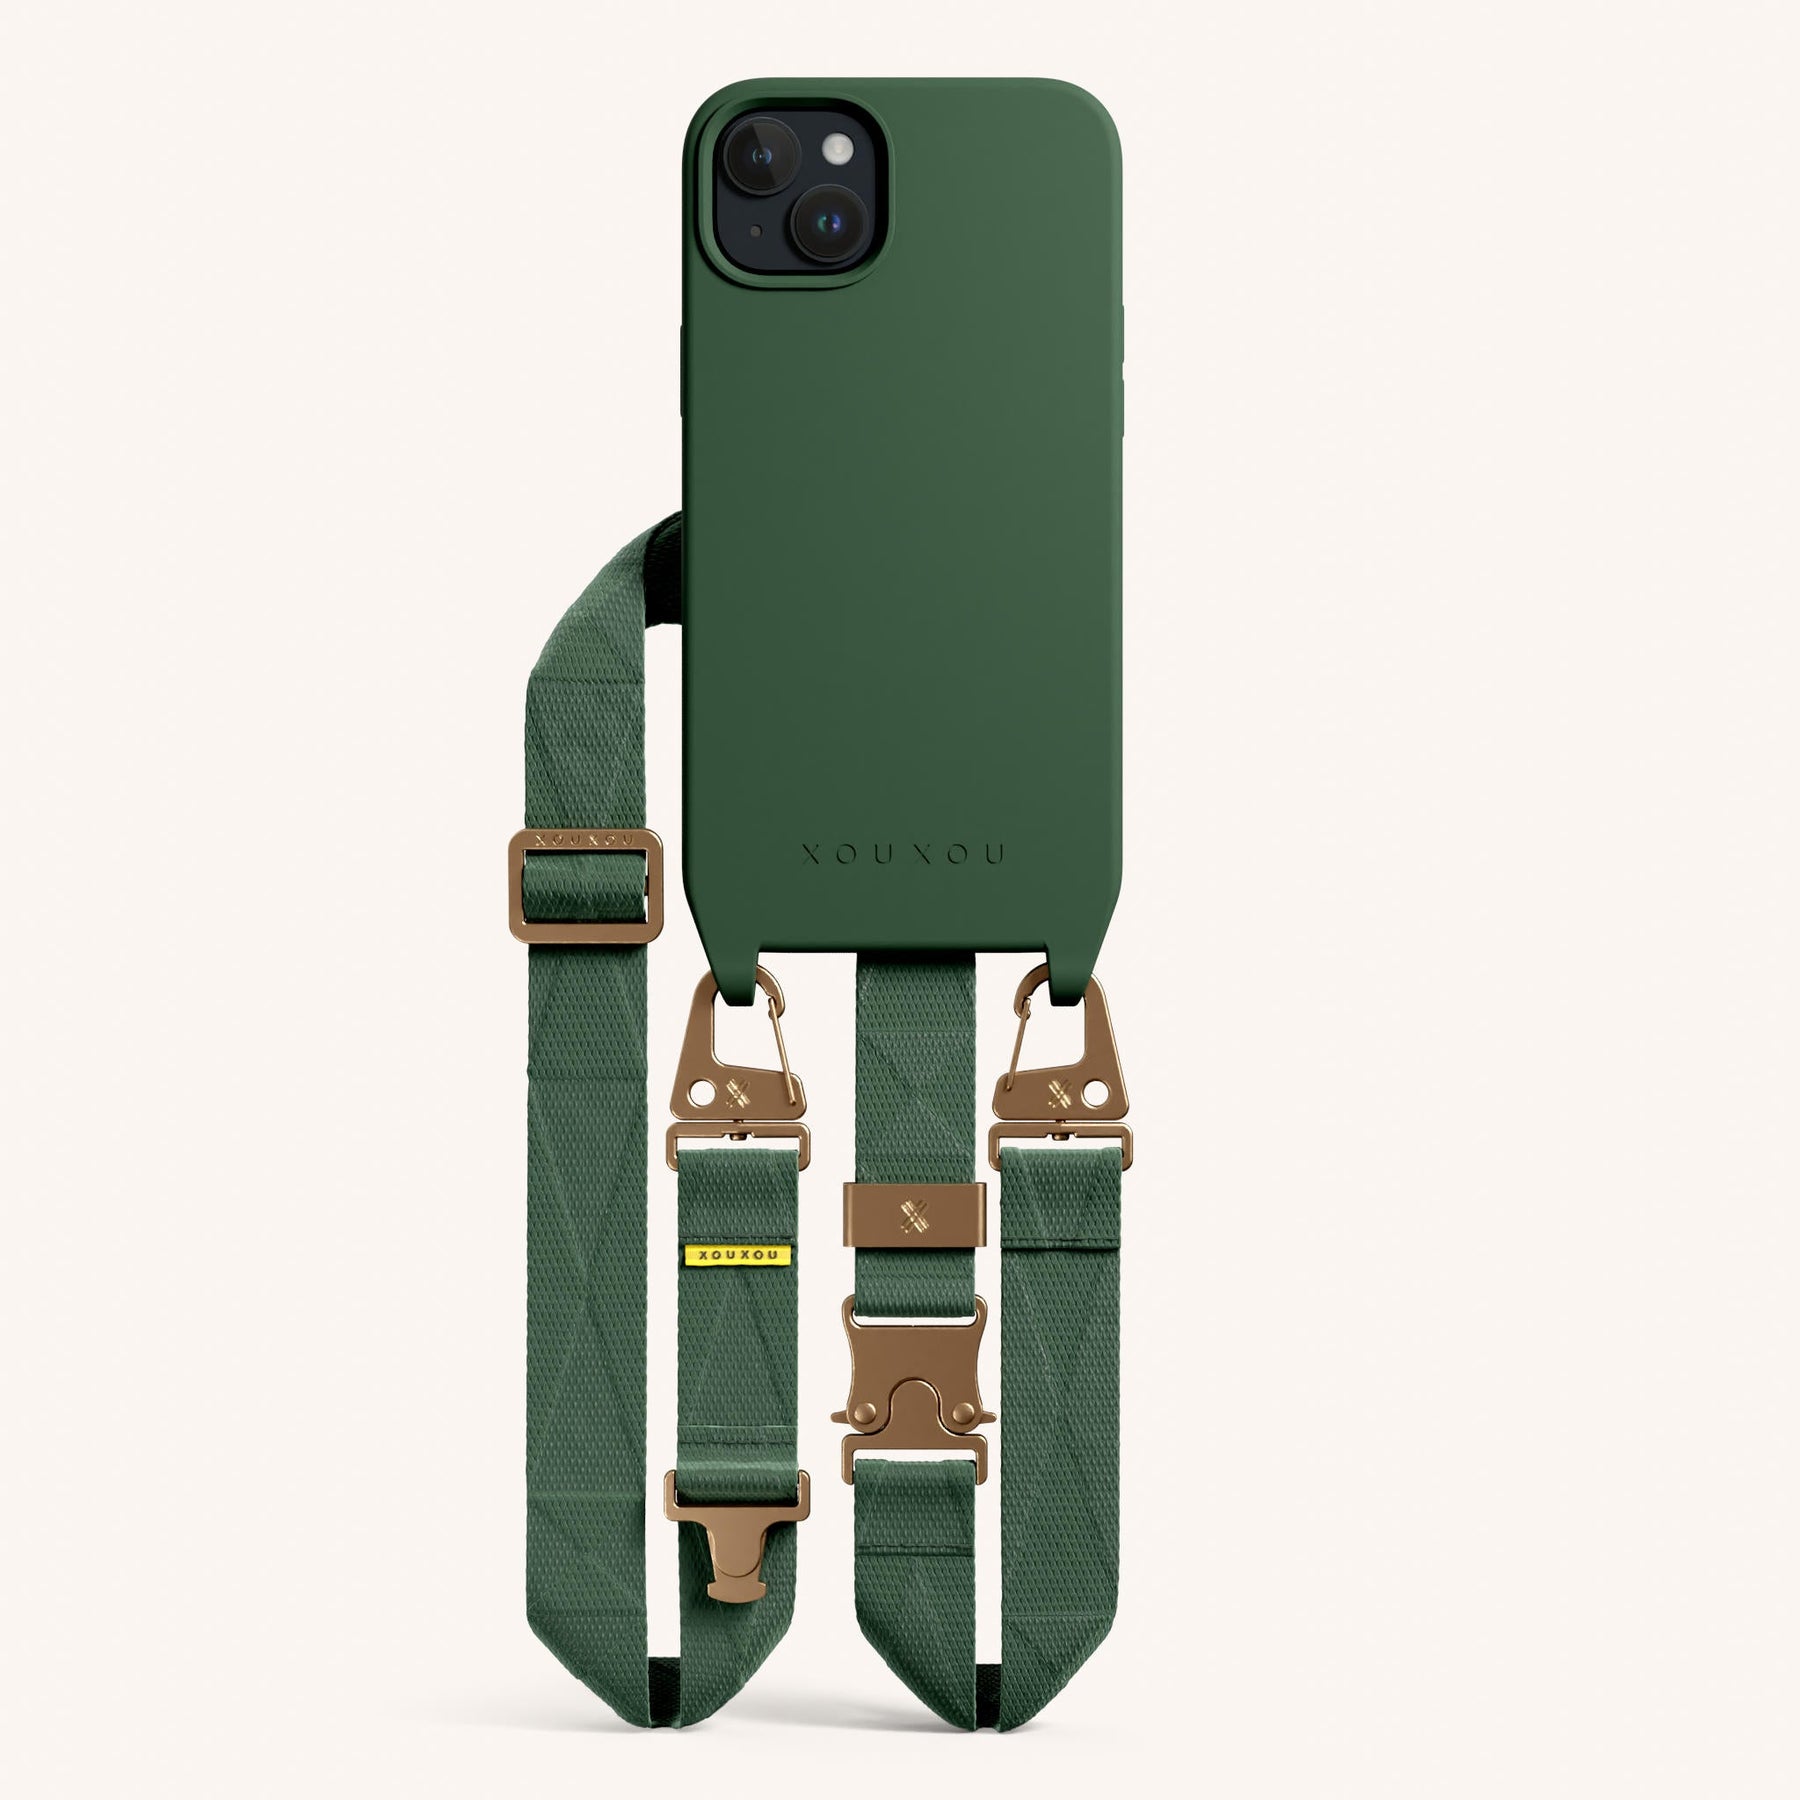 gucci iphone 14plus/14/14pro max case coque hulle